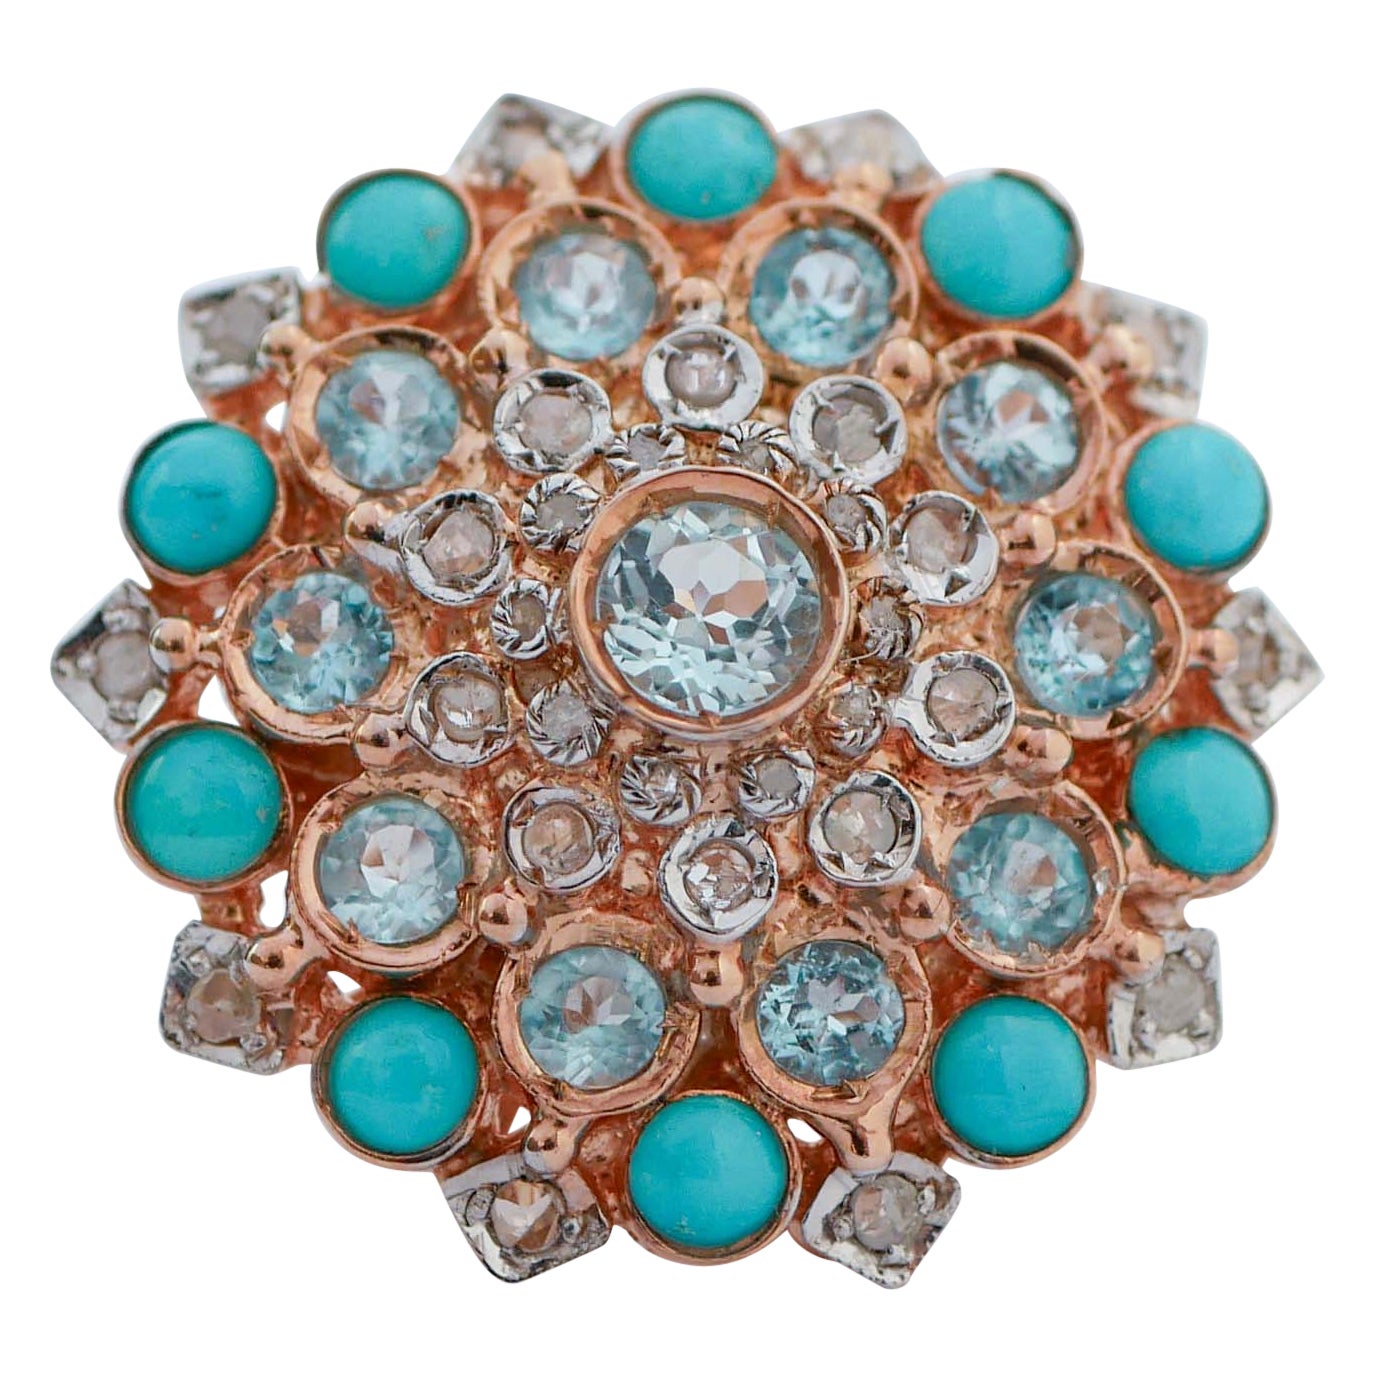 Turquoise, Aquamarine Colour Topazs, Diamonds, Rose Gold and Silver Ring. For Sale